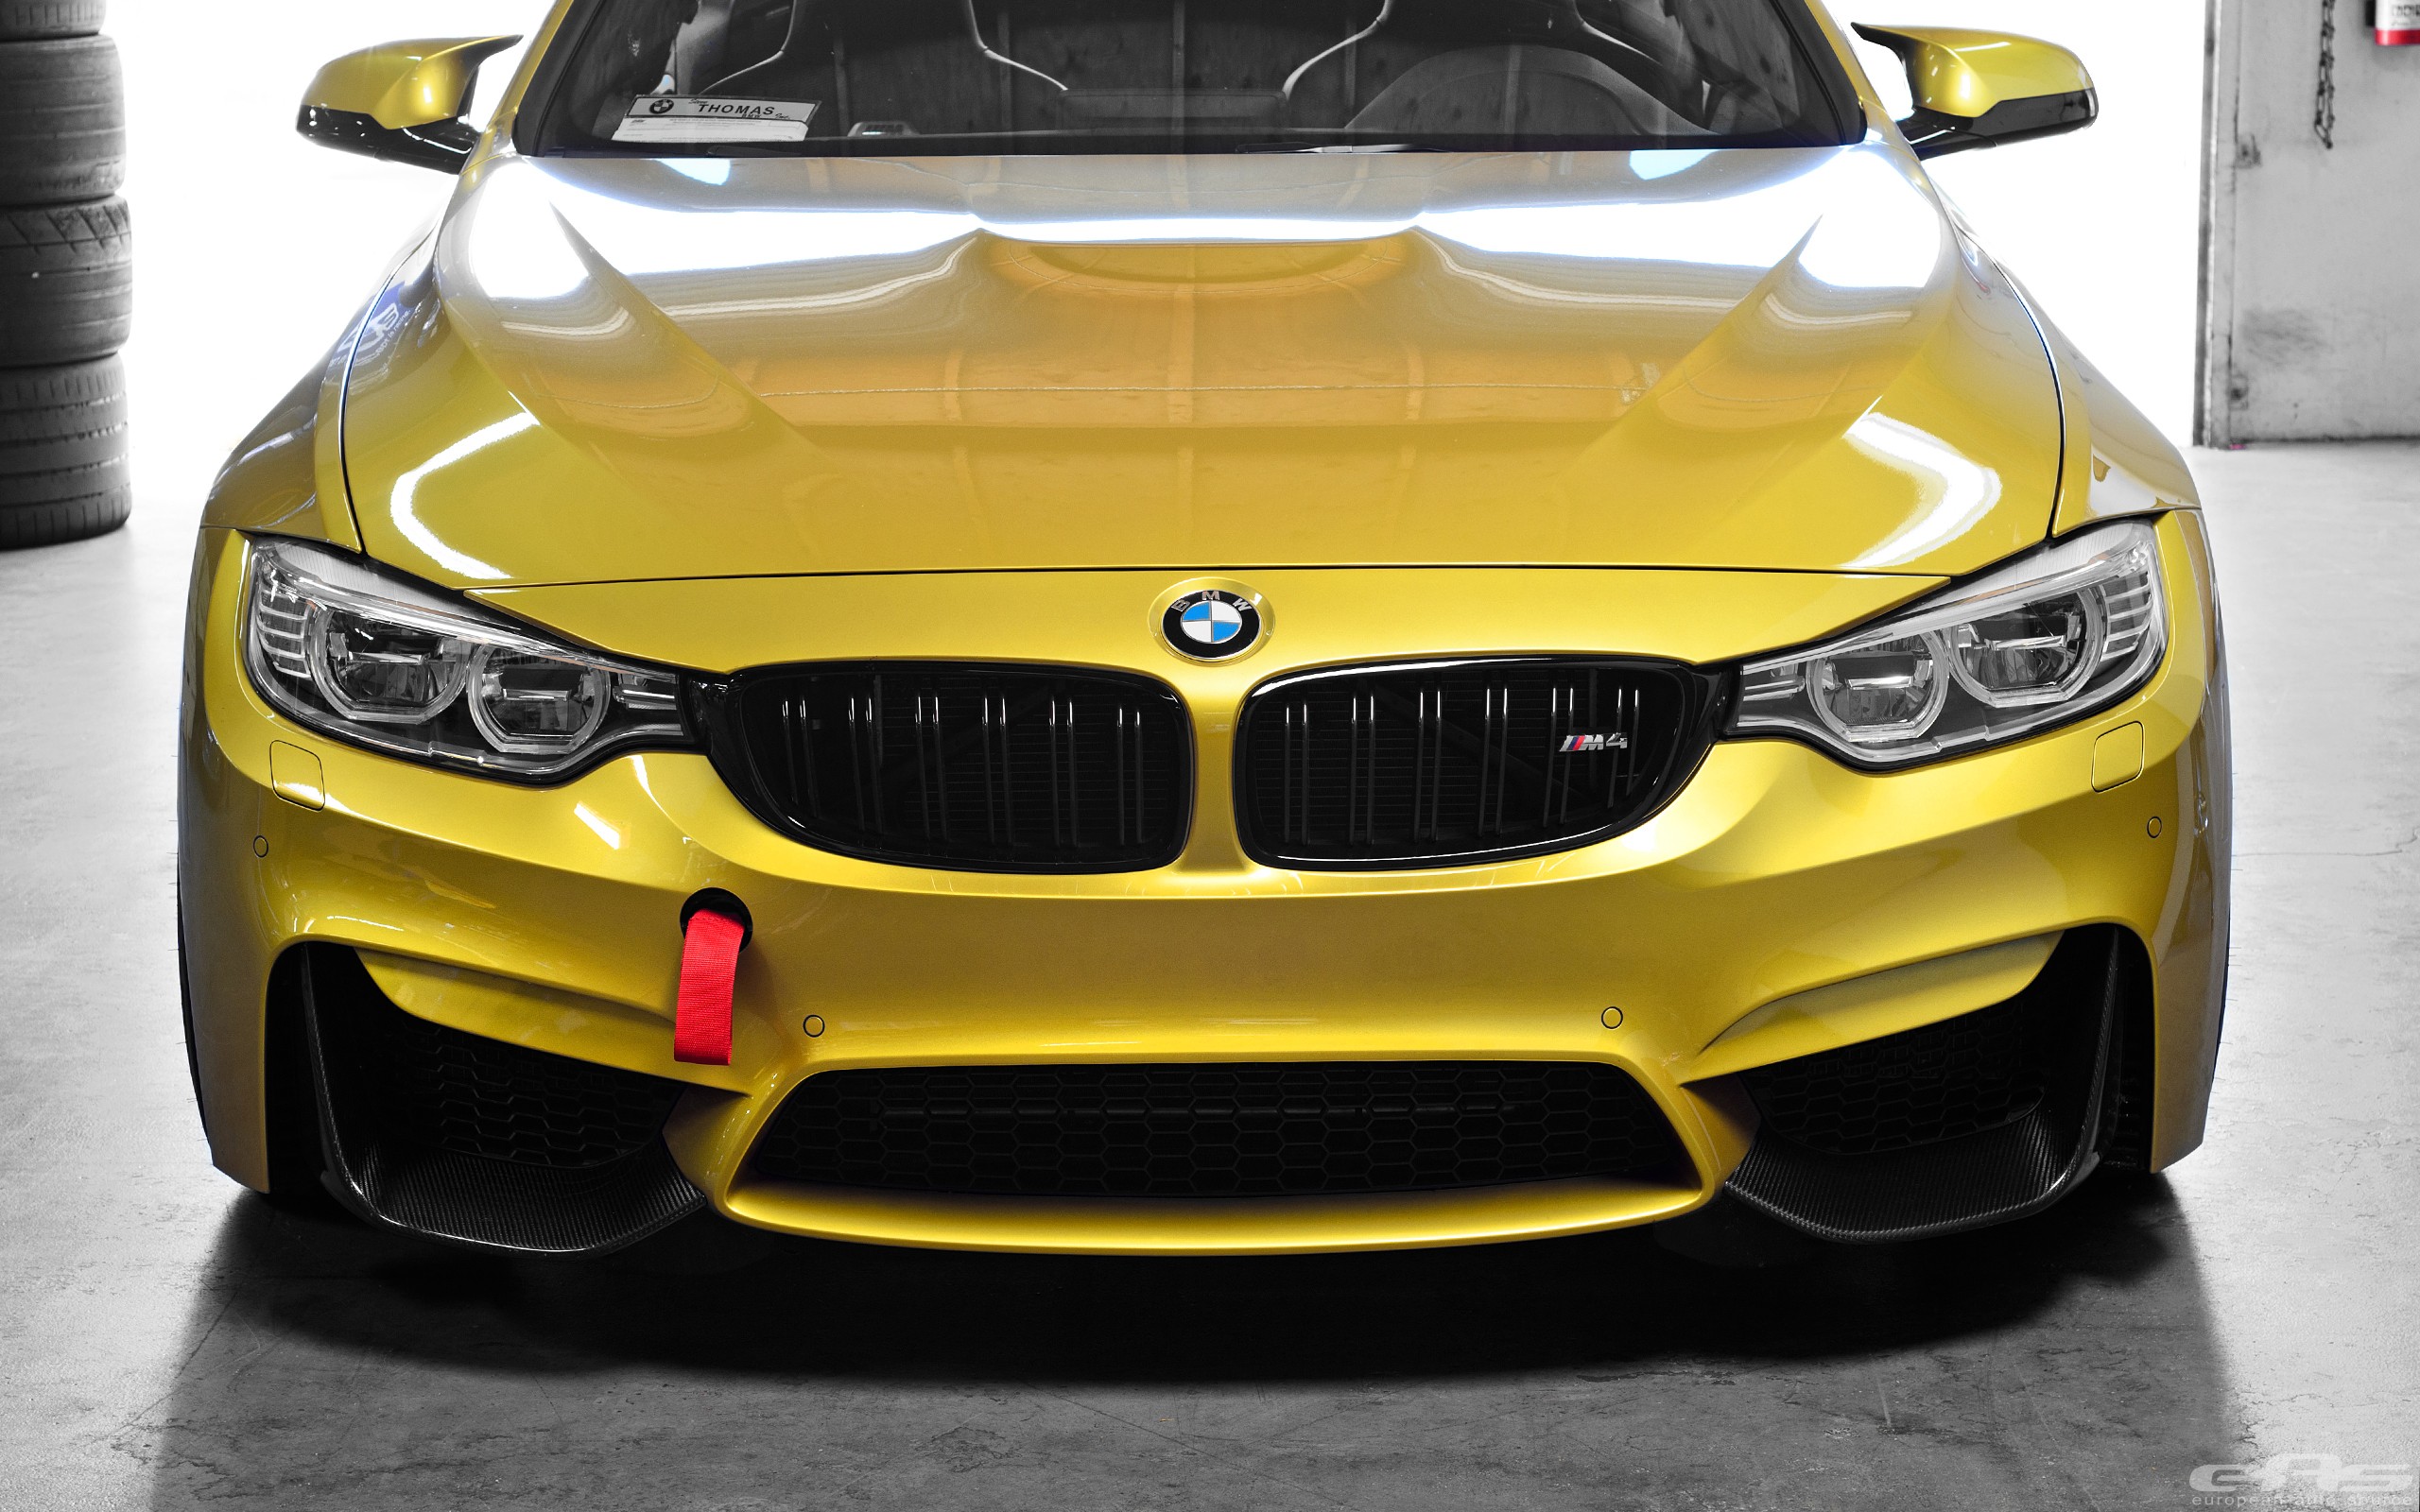 https://s1.cdn.autoevolution.com/images/news/gallery/macht-schnell-tow-straps-for-bmw-f80-m3-and-f82-m4-now-available-photo-gallery_1.jpg